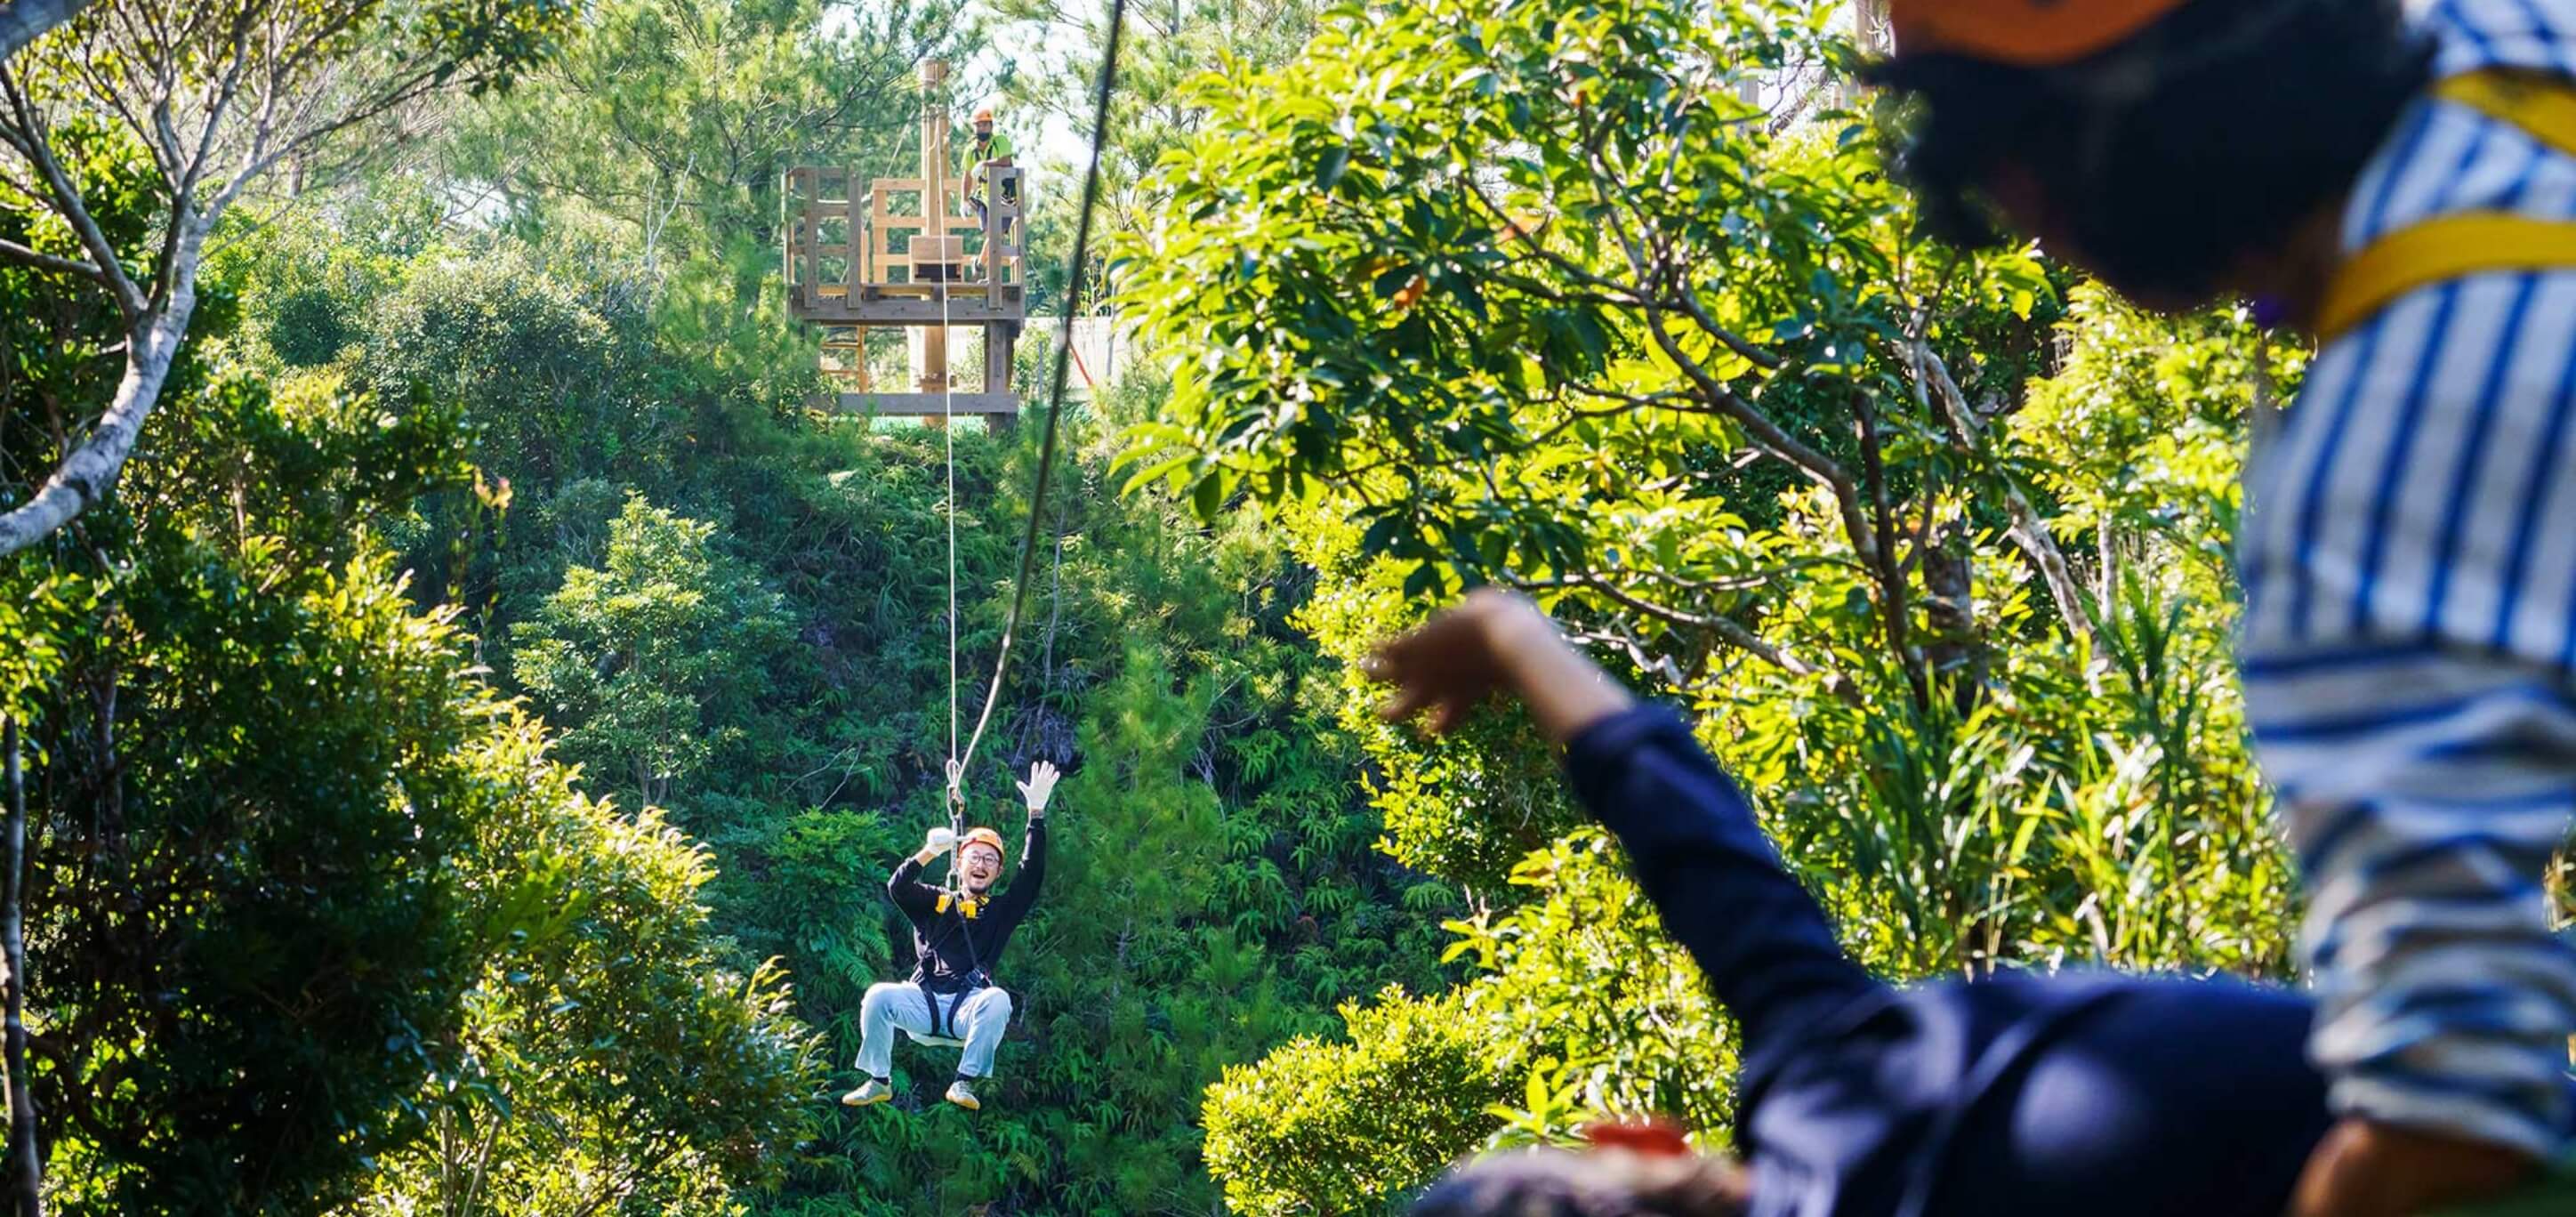 At first the Zipline makes you so afraid you can't move, but as you get used to it you are able to wave to your family with the Yambaru forest in the background.